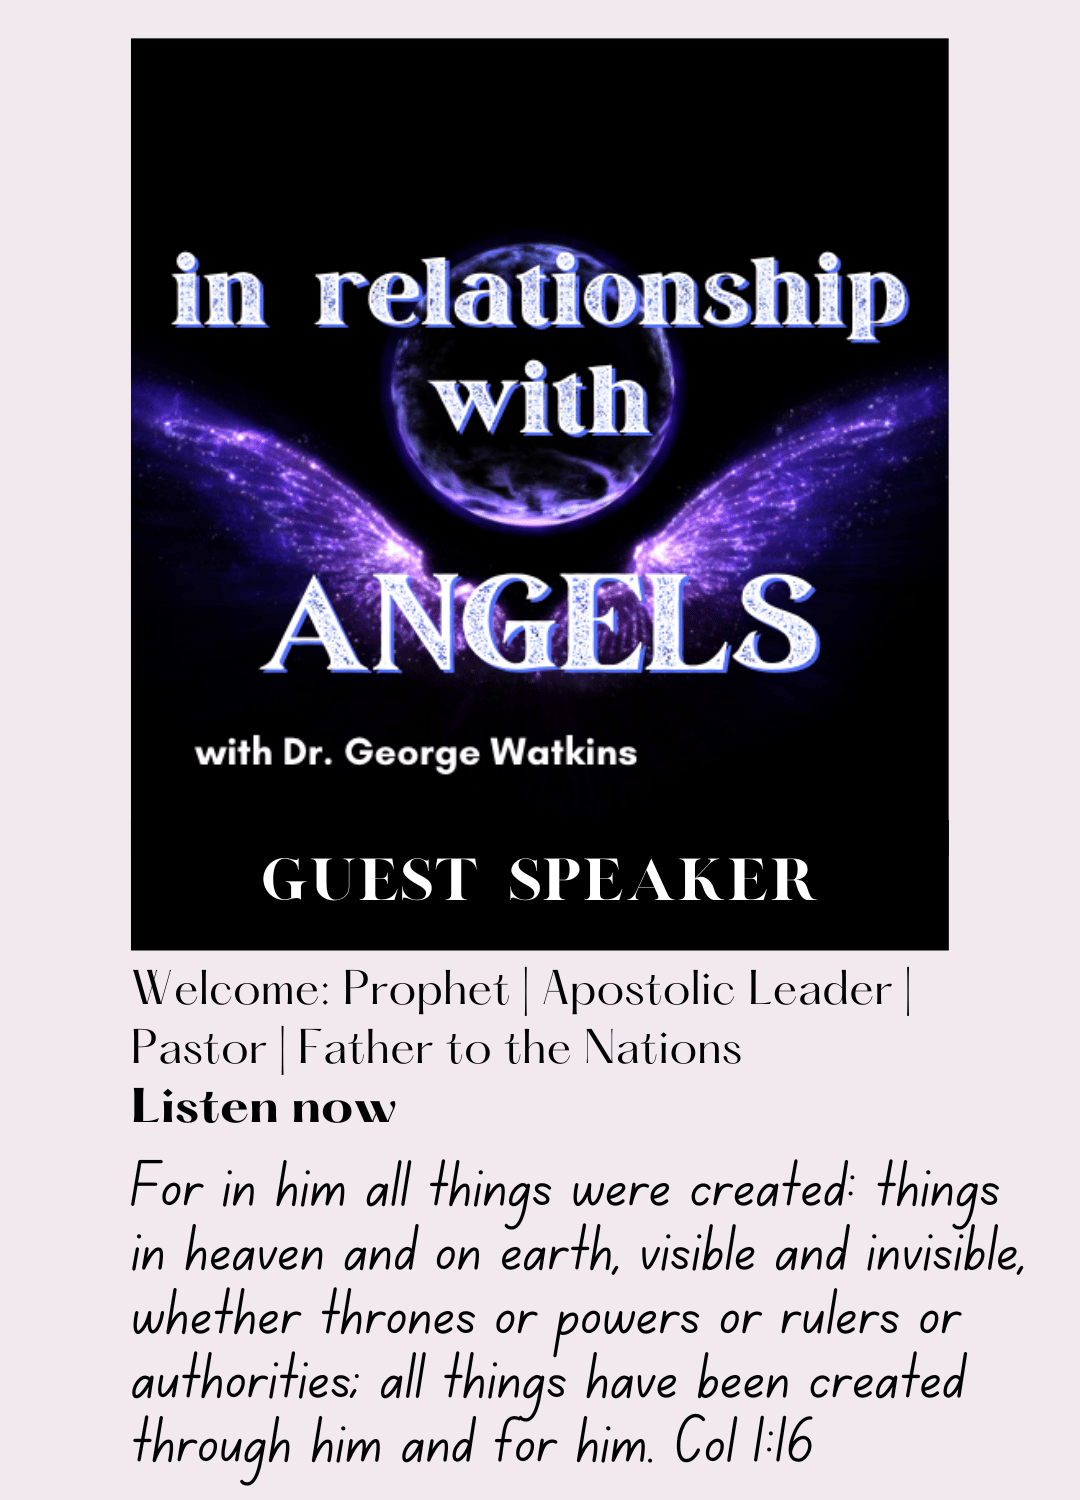 Intentional Now Podcast Episode in Relationship with Angels